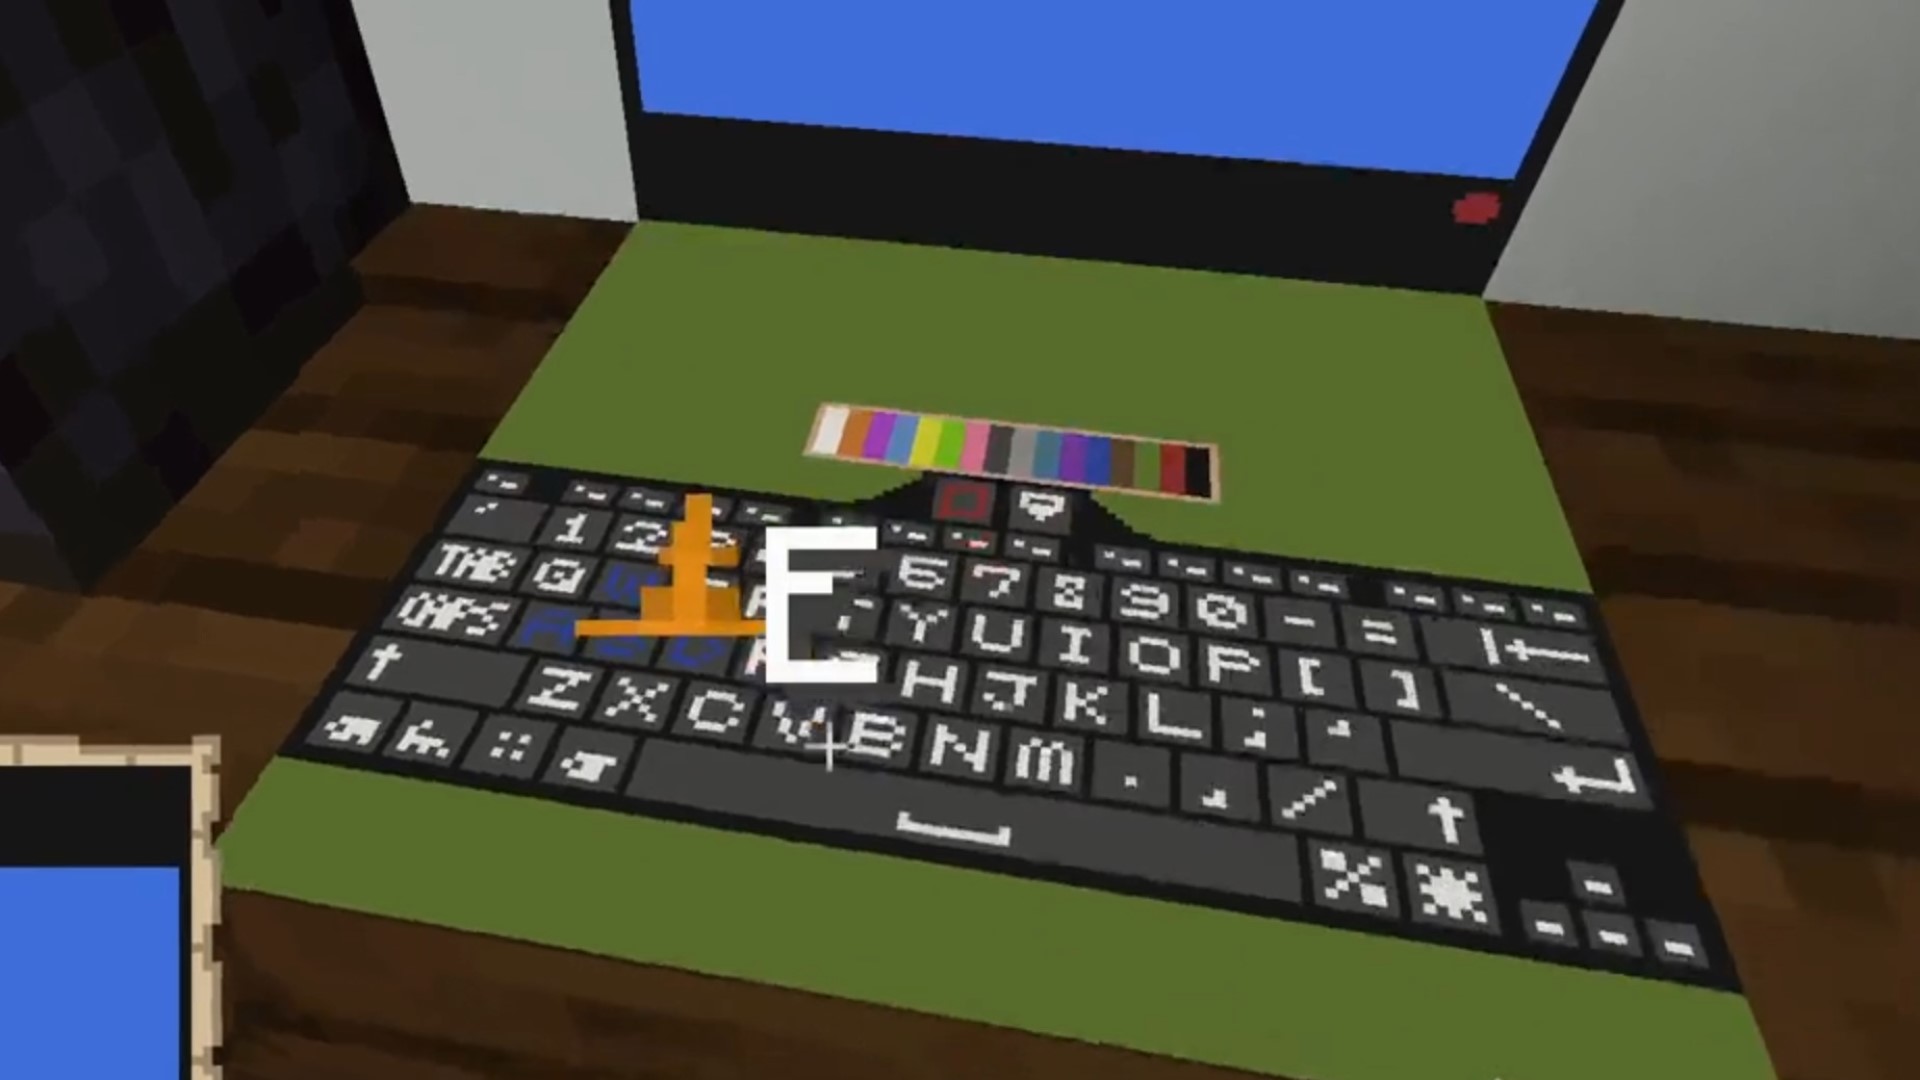 Minecraft has a fully functional keyboard now